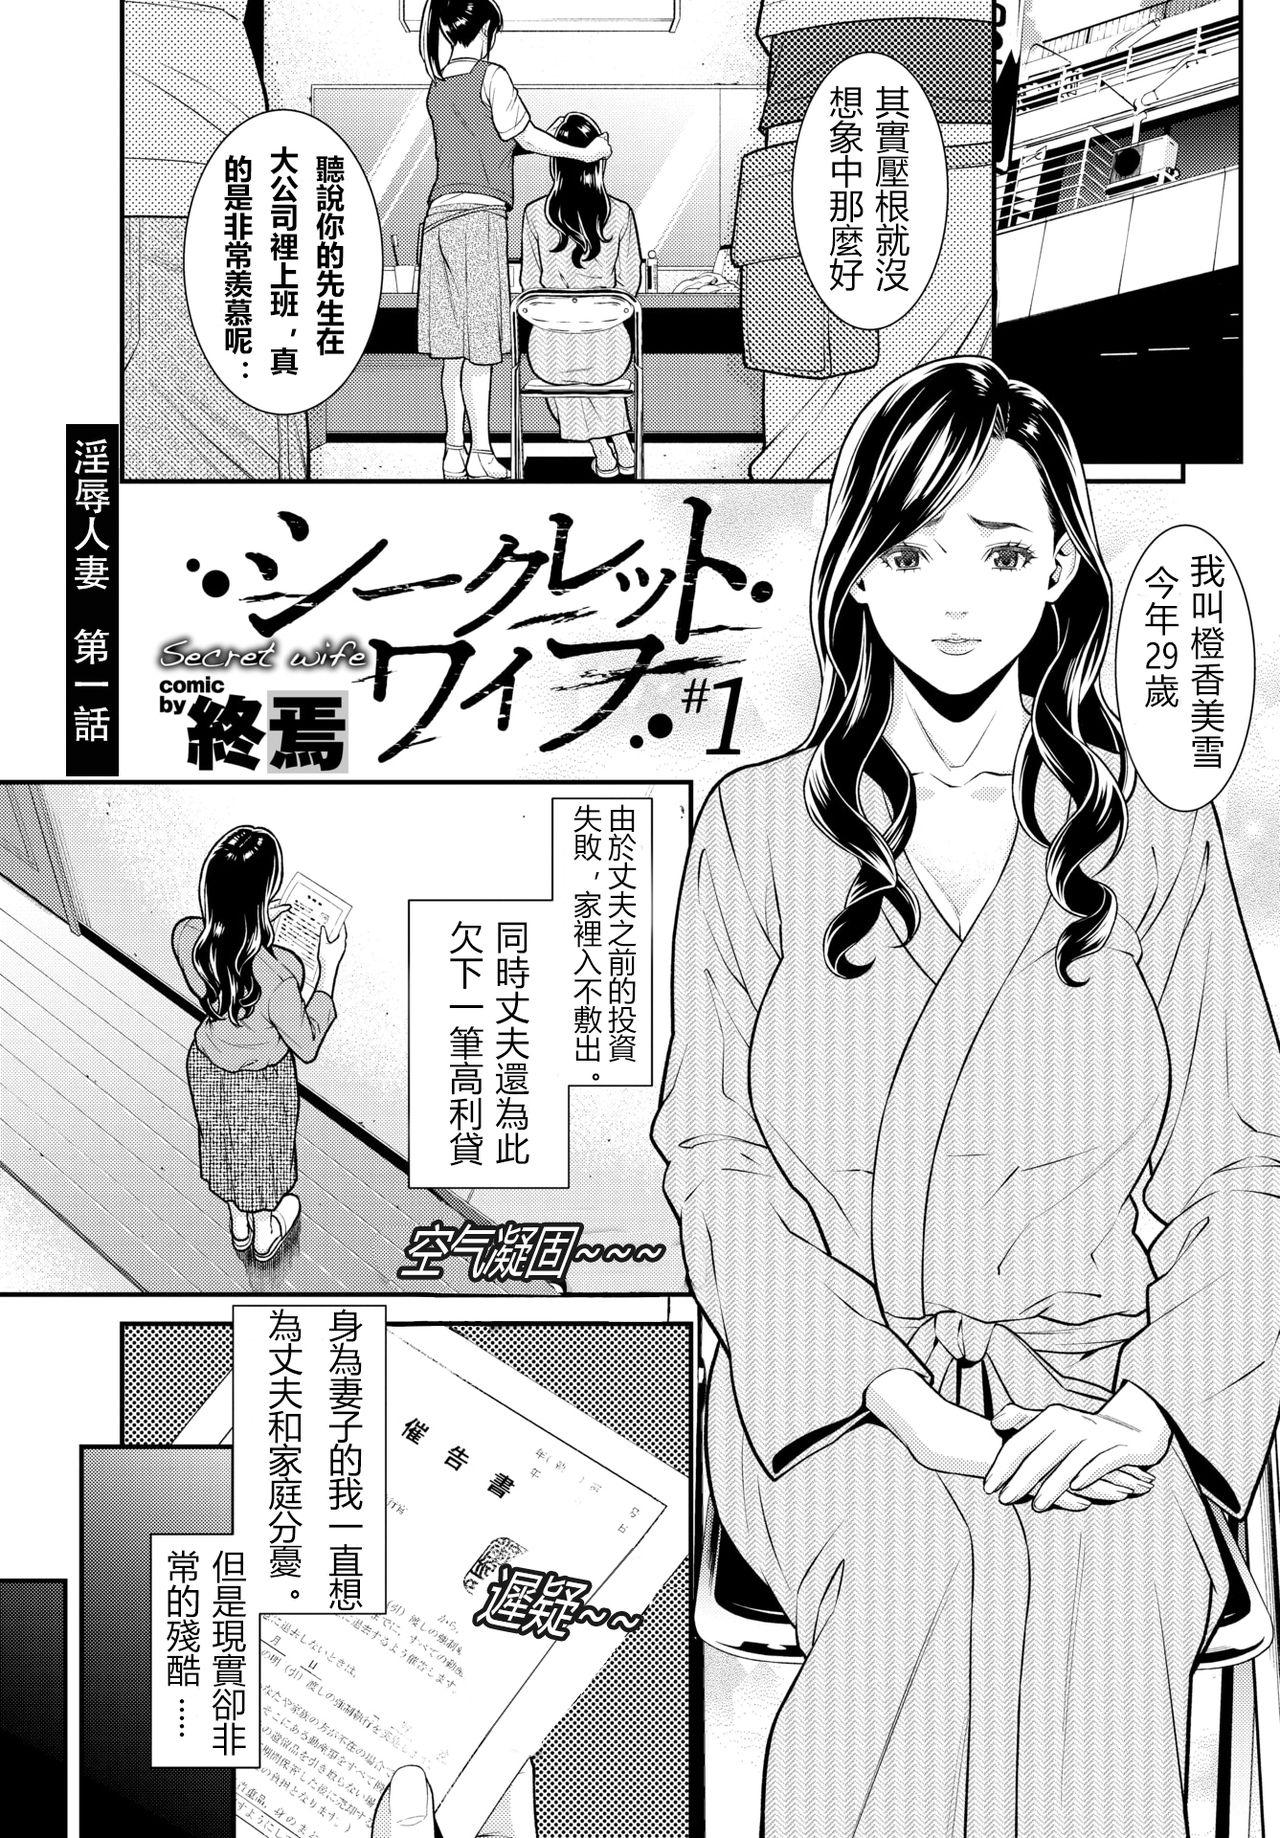 Pounded [Syuuen] Secret Wife 1-6 [Chinese][鼠灣漢化]（210206最新修复完整版）【極品人妻NTR】 Dorm - Page 2